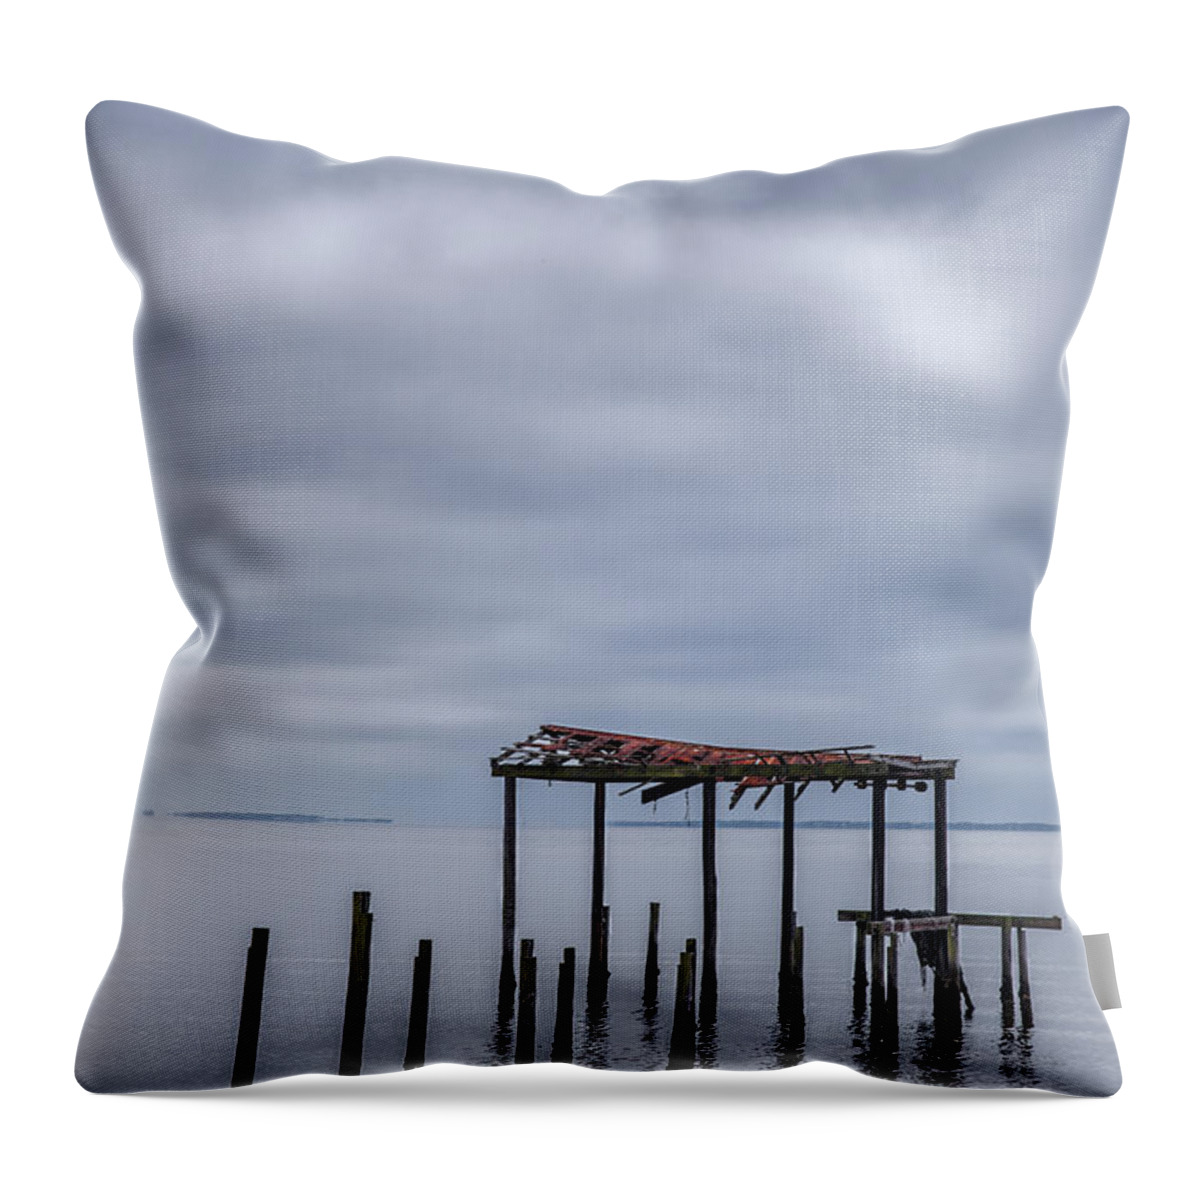 Acrylic Throw Pillow featuring the photograph Won't Let Go by Jon Glaser